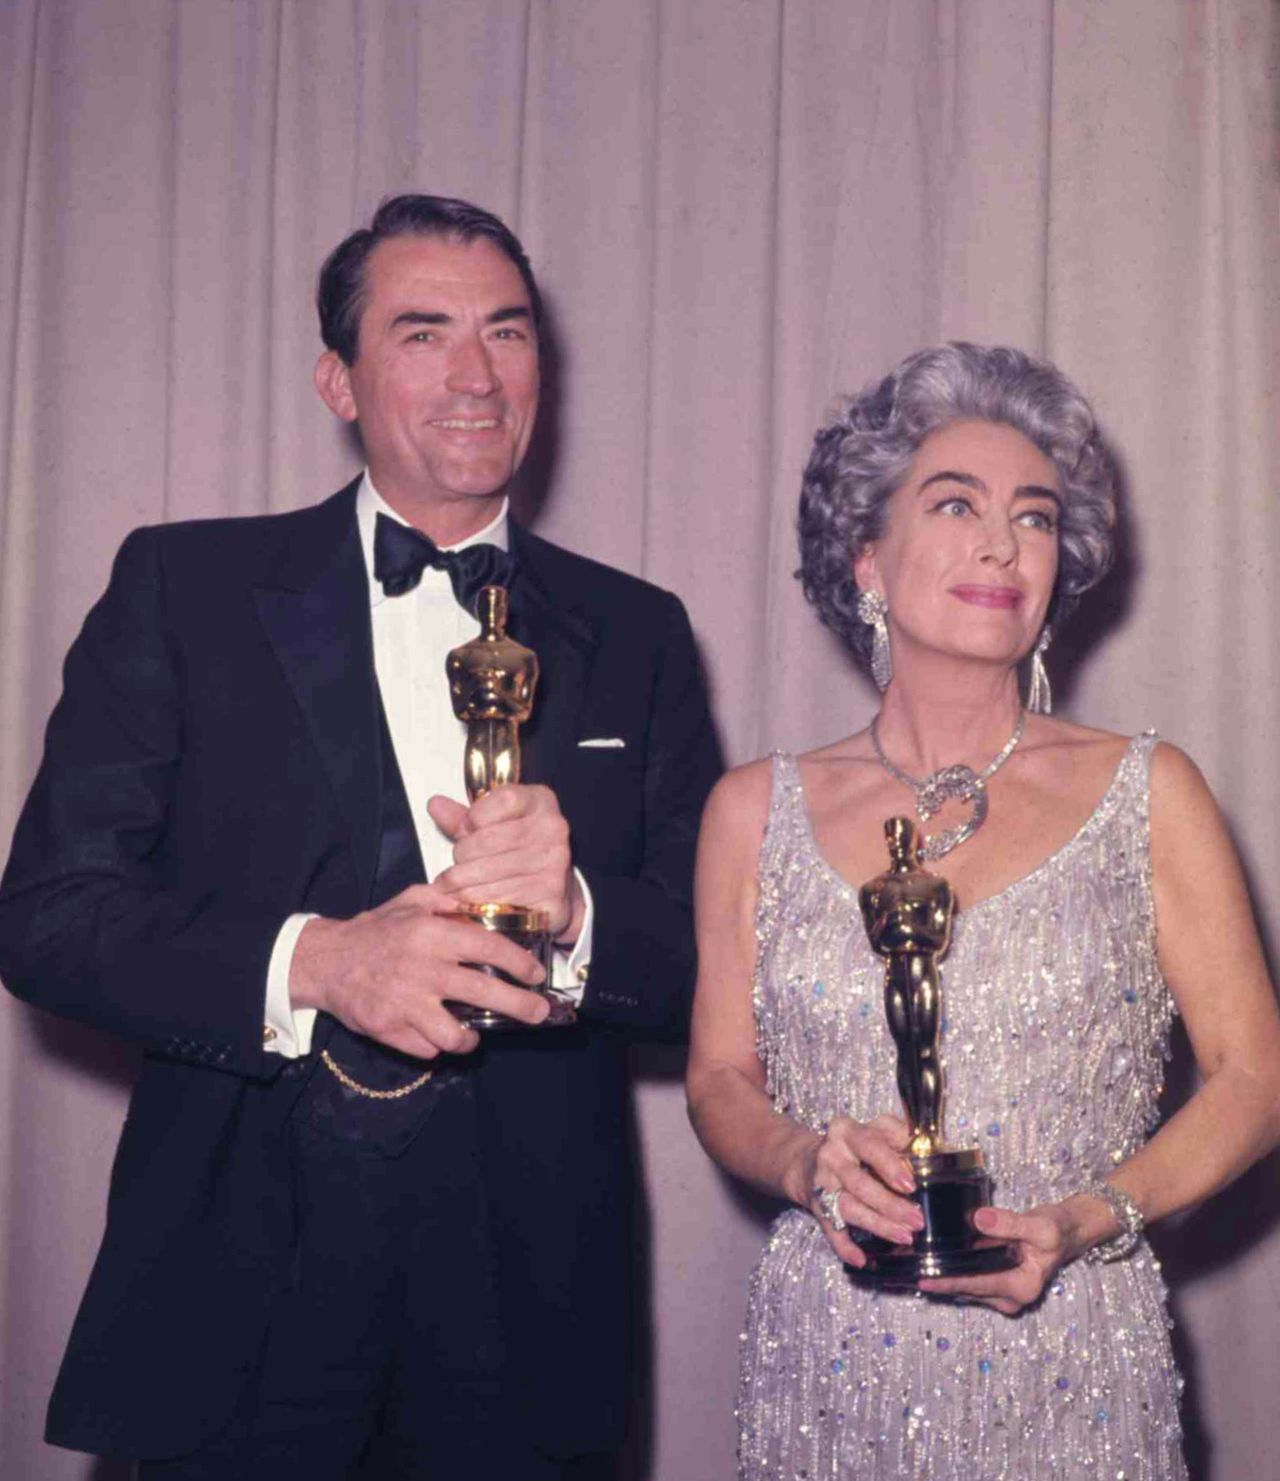 Crawford shares the Oscar spotlight with best actor winner Gregory Peck ("To Kill a Mockingbird") at the 1963 ceremony. She holds the best actress award for Anne Bancroft ("The Miracle Worker"), who was appearing in a play in New York. Davis received her 10th Oscar nomination for best actress for "Baby Jane" -- then a record -- and she hoped to become the first actress to win three Academy Awards. She was devastated when she lost, but Crawford wasn't. Denied a nomination herself, Crawford offered to accept the award for Bancroft or other no-show nominees, infuriating Davis. 